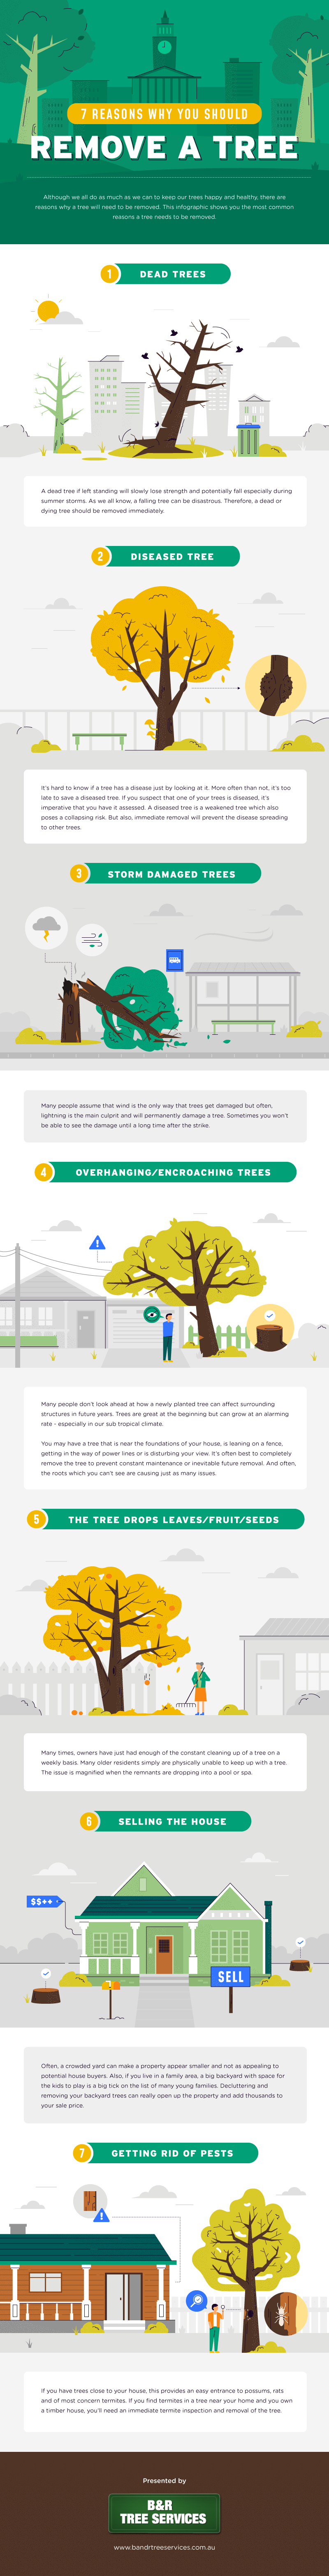 Infographic for 7 Reasons Why You Should Remove a Tree